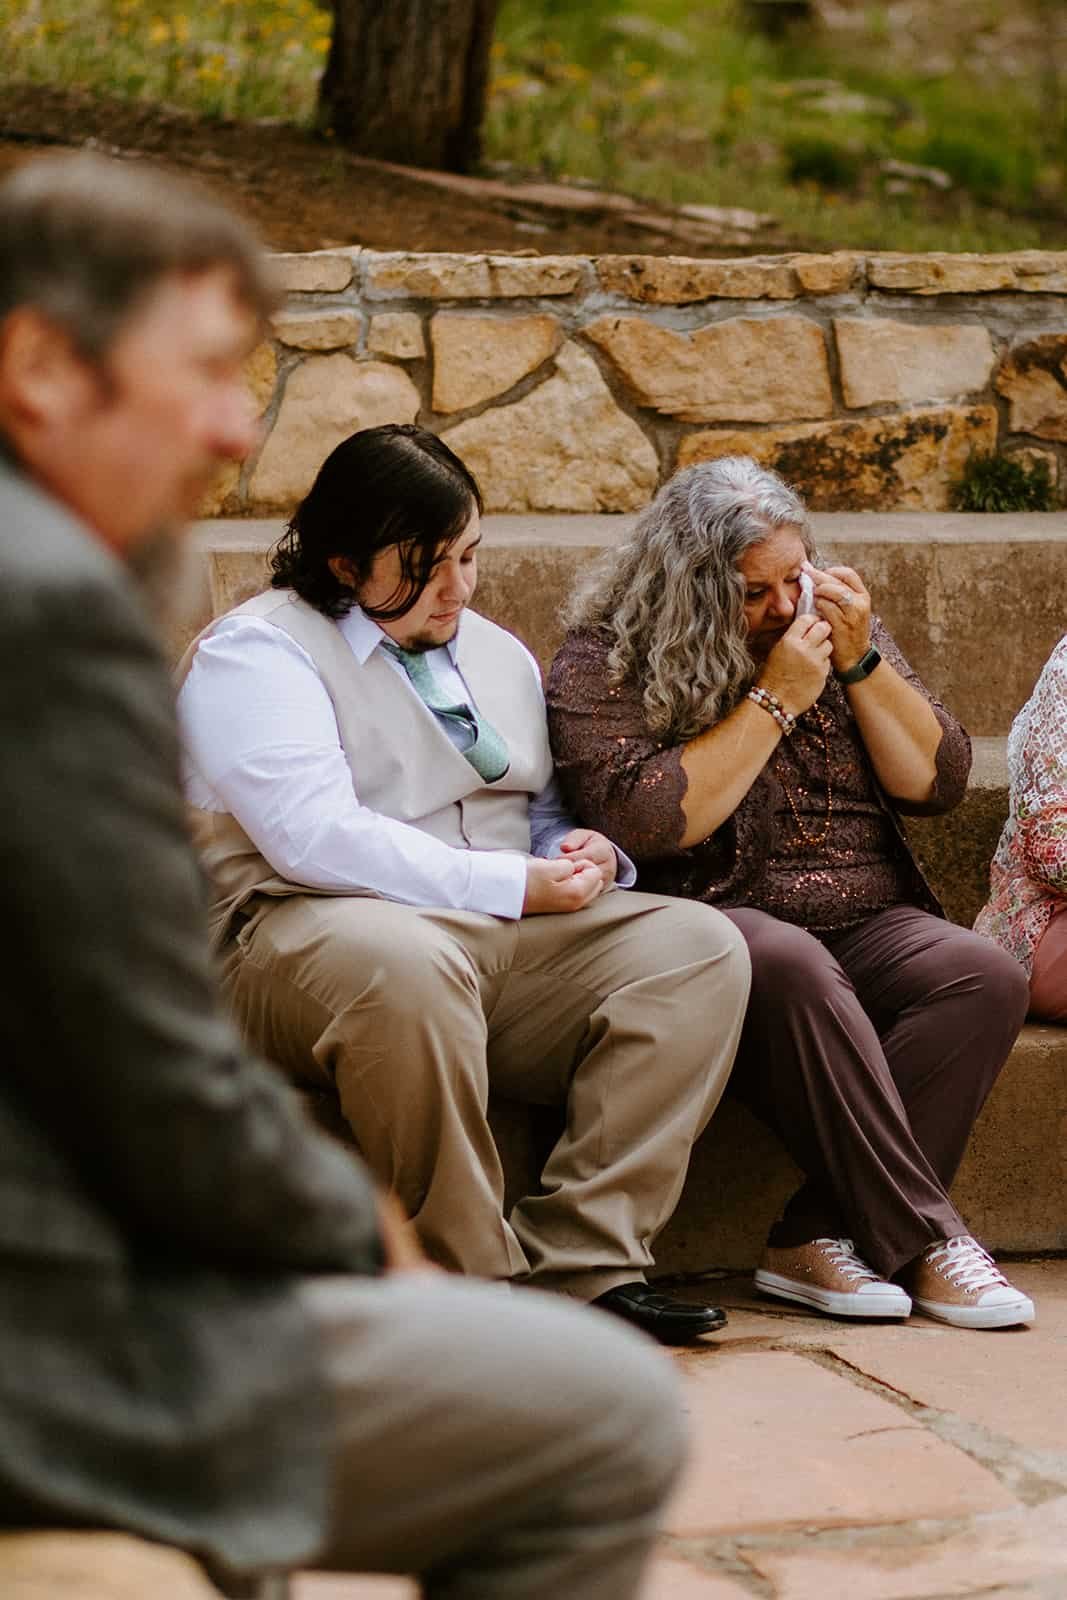 A family member wipes away emotional tears while looking on at a wedding ceremony